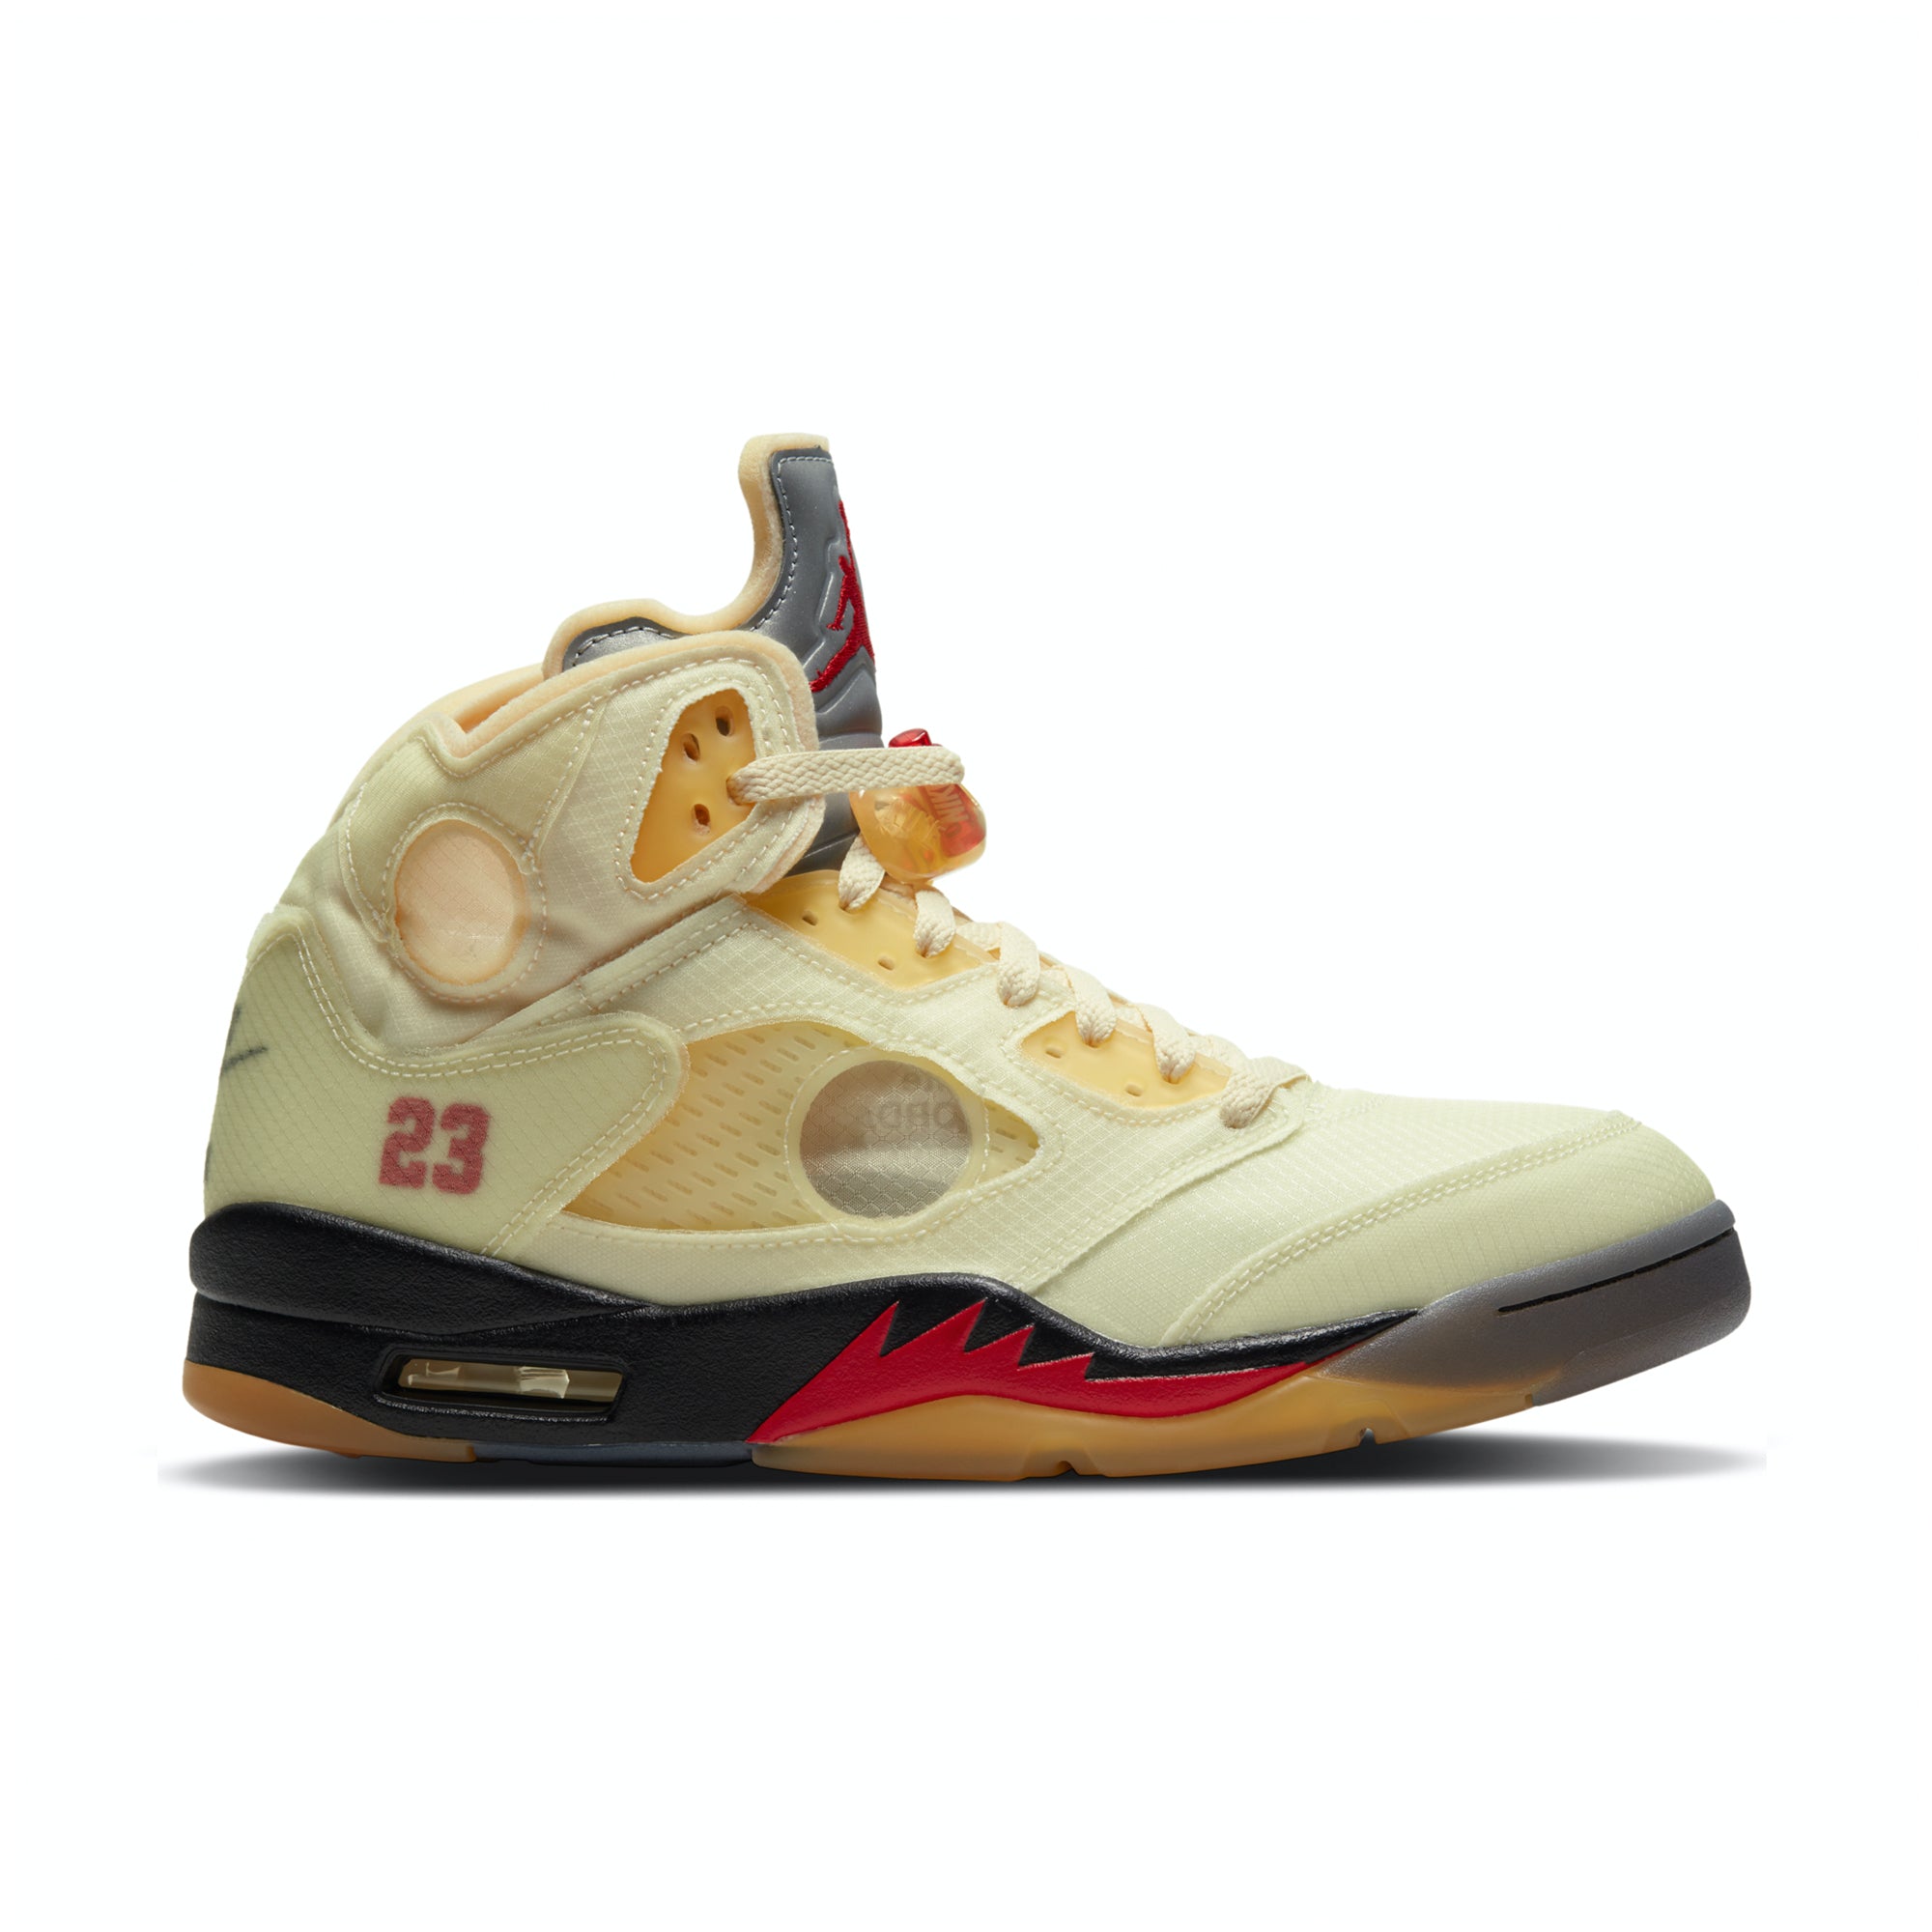 how much are the off white jordan 5